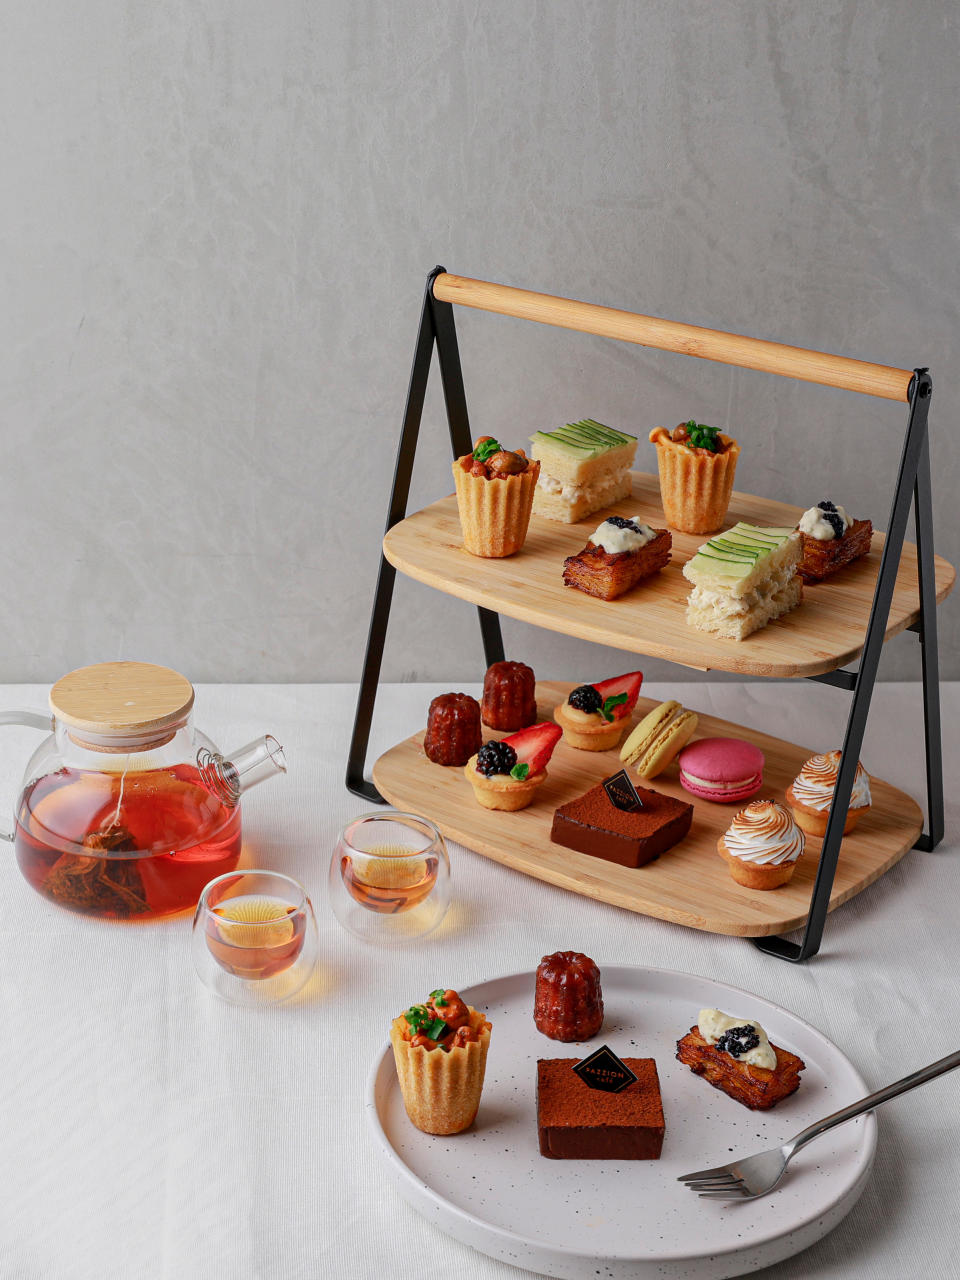 Retailing at $49.00, this PAZZION Mother's Day High Tea set includes savoury mini sandwiches and pie tees, finished with an array of meringues, pudding and fruit tarts. (Photo: PAZZION)